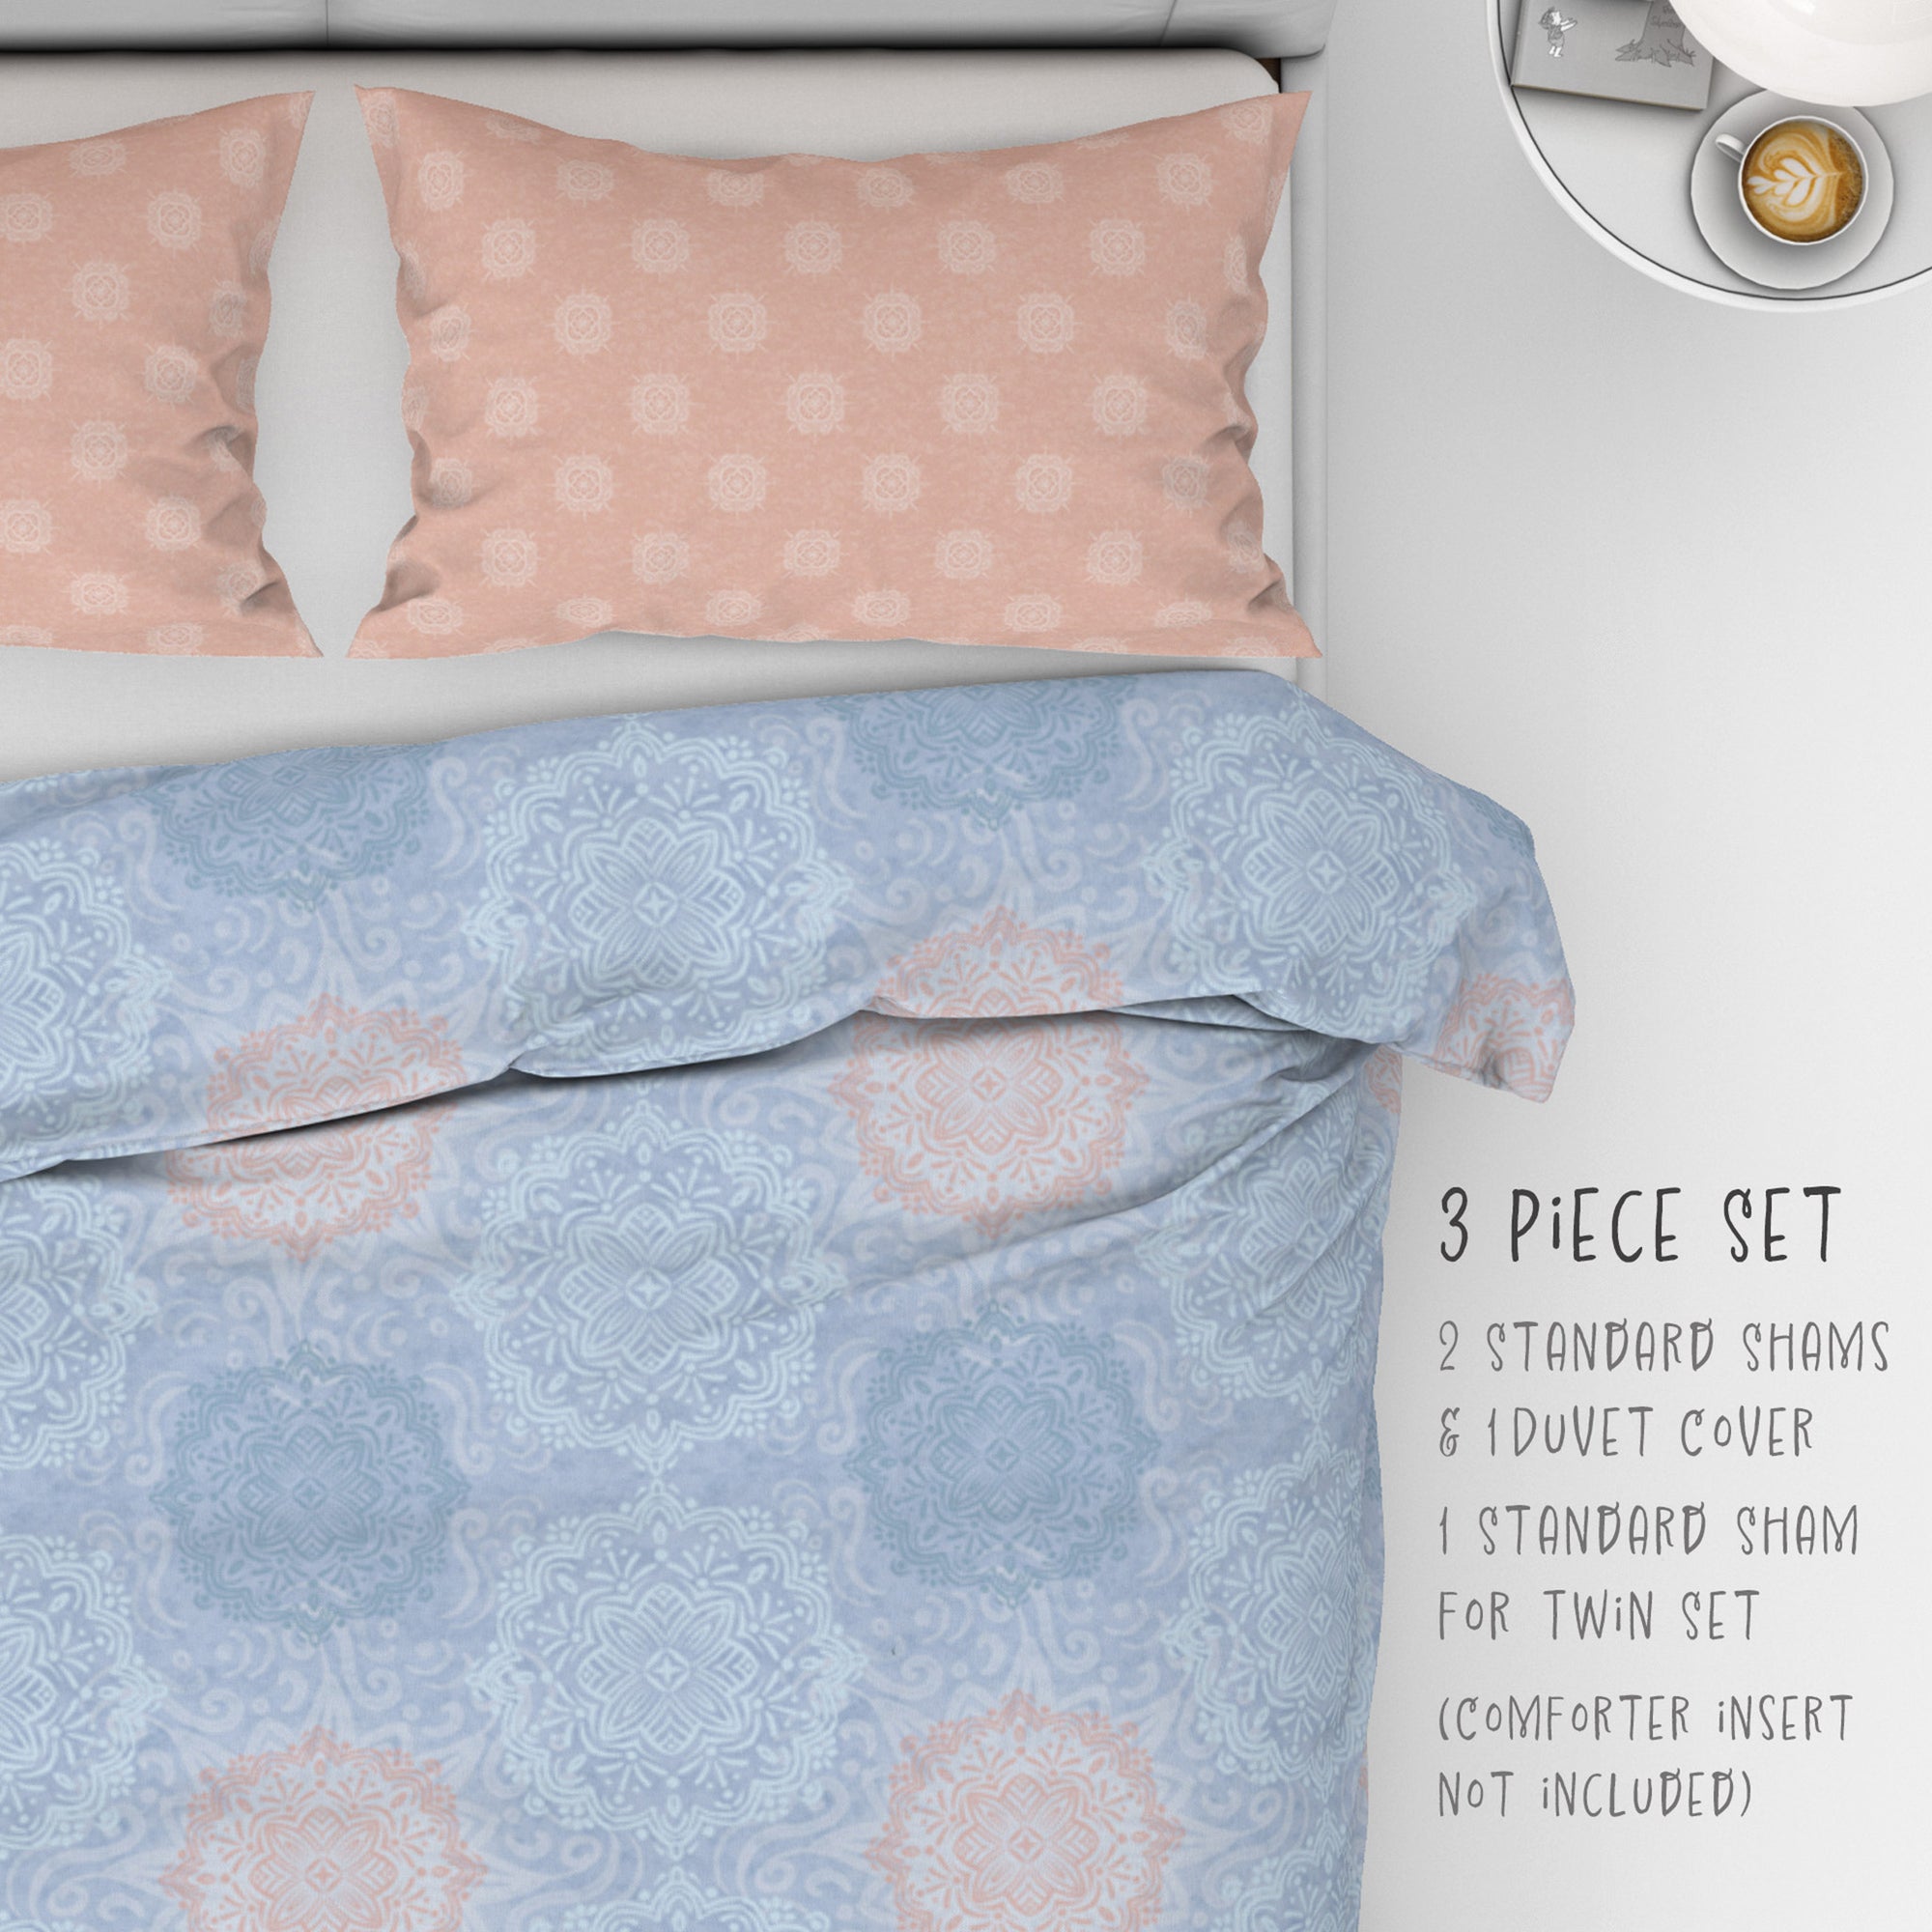 3 Piece Set for Queen & King sizes - Mandala Peach Boho Bliss Pastel Cotton Bedding comes with Duvet cover and two Shams